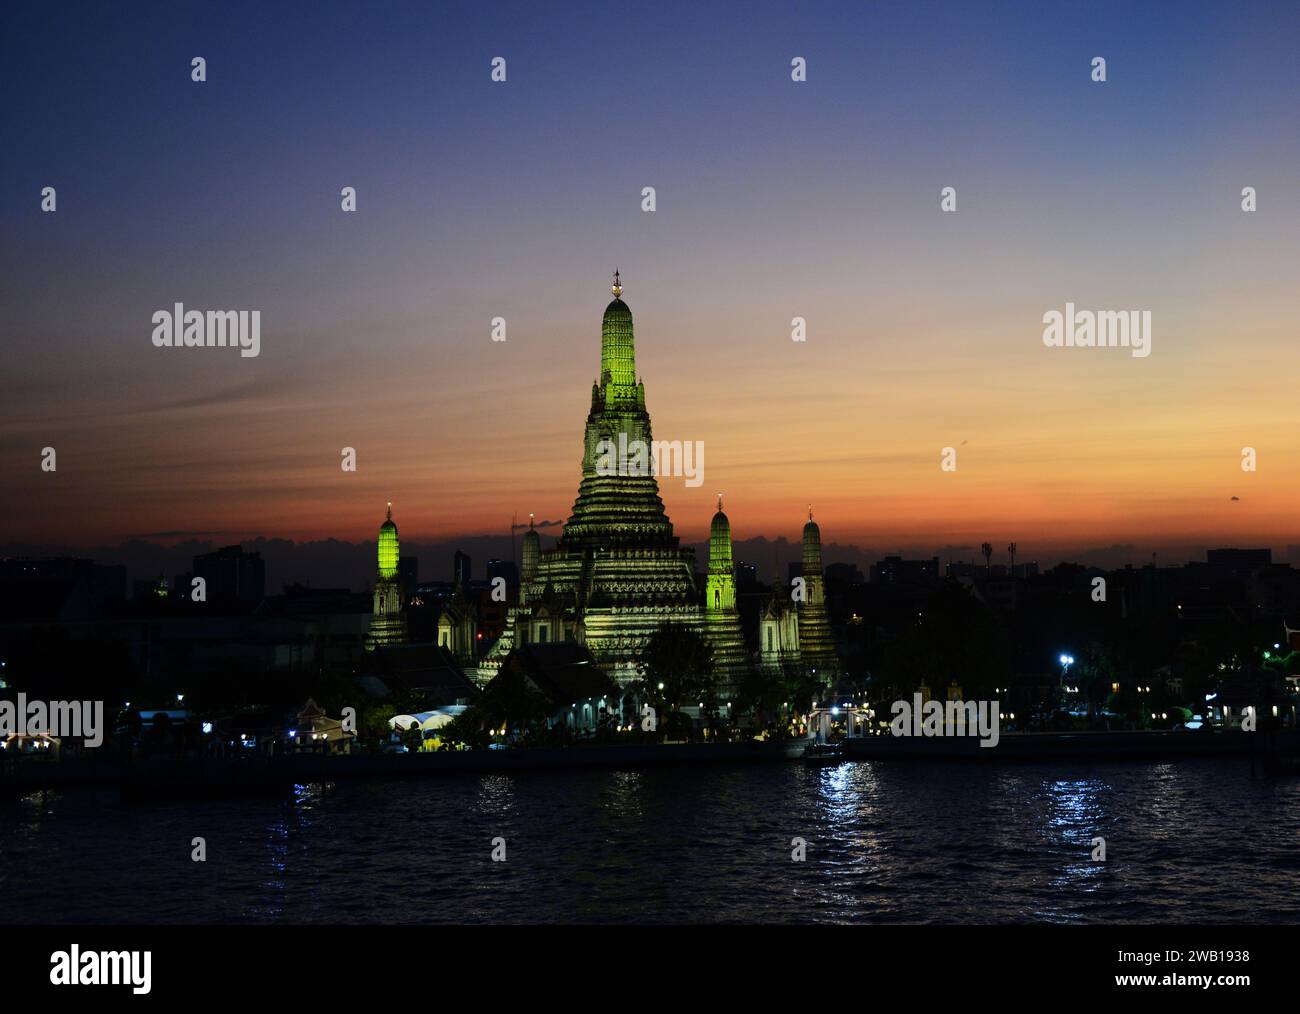 Wat Arun (Temple of Dawn) on the banks of the Chao Phraya River in Bangkok, Thailand. Stock Photo